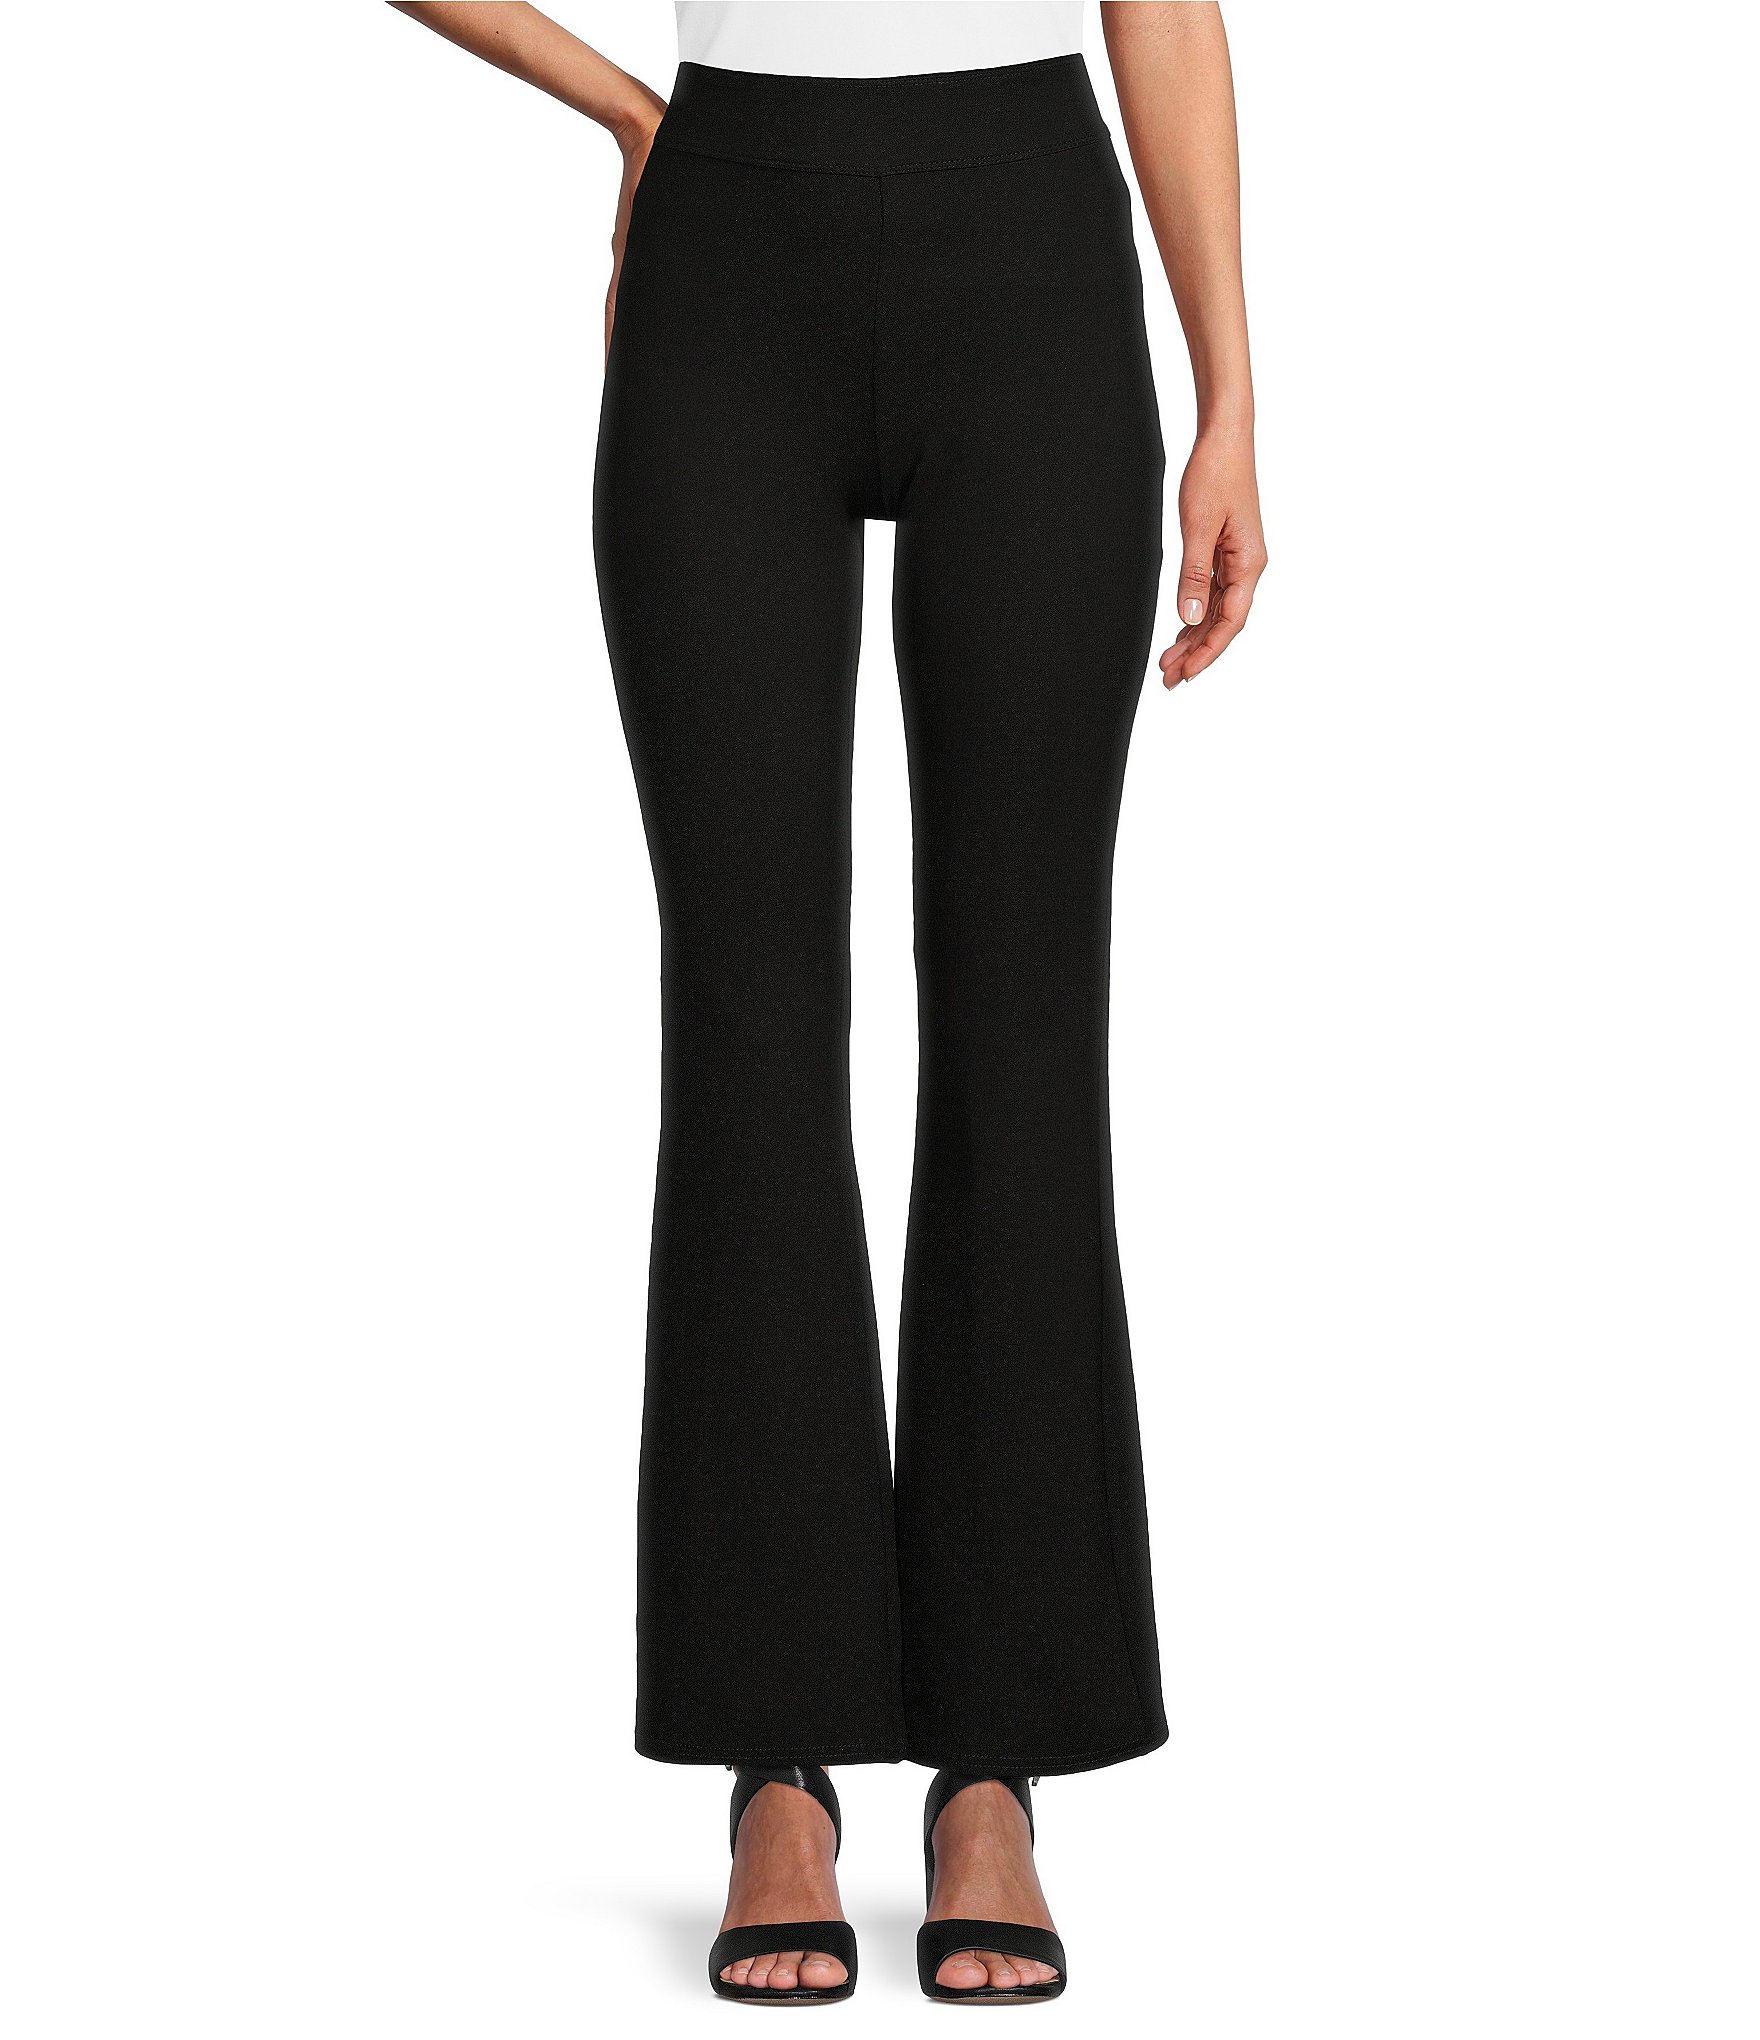 https://dimg.dillards.com/is/image/DillardsZoom/zoom/slim-factor-by-investments-ponte-knit-wide-waistband-pull-on-flare-leg-leggings/00000002_zi_33ee1f7d-474f-4b37-a80a-026eb5111e8a.jpg